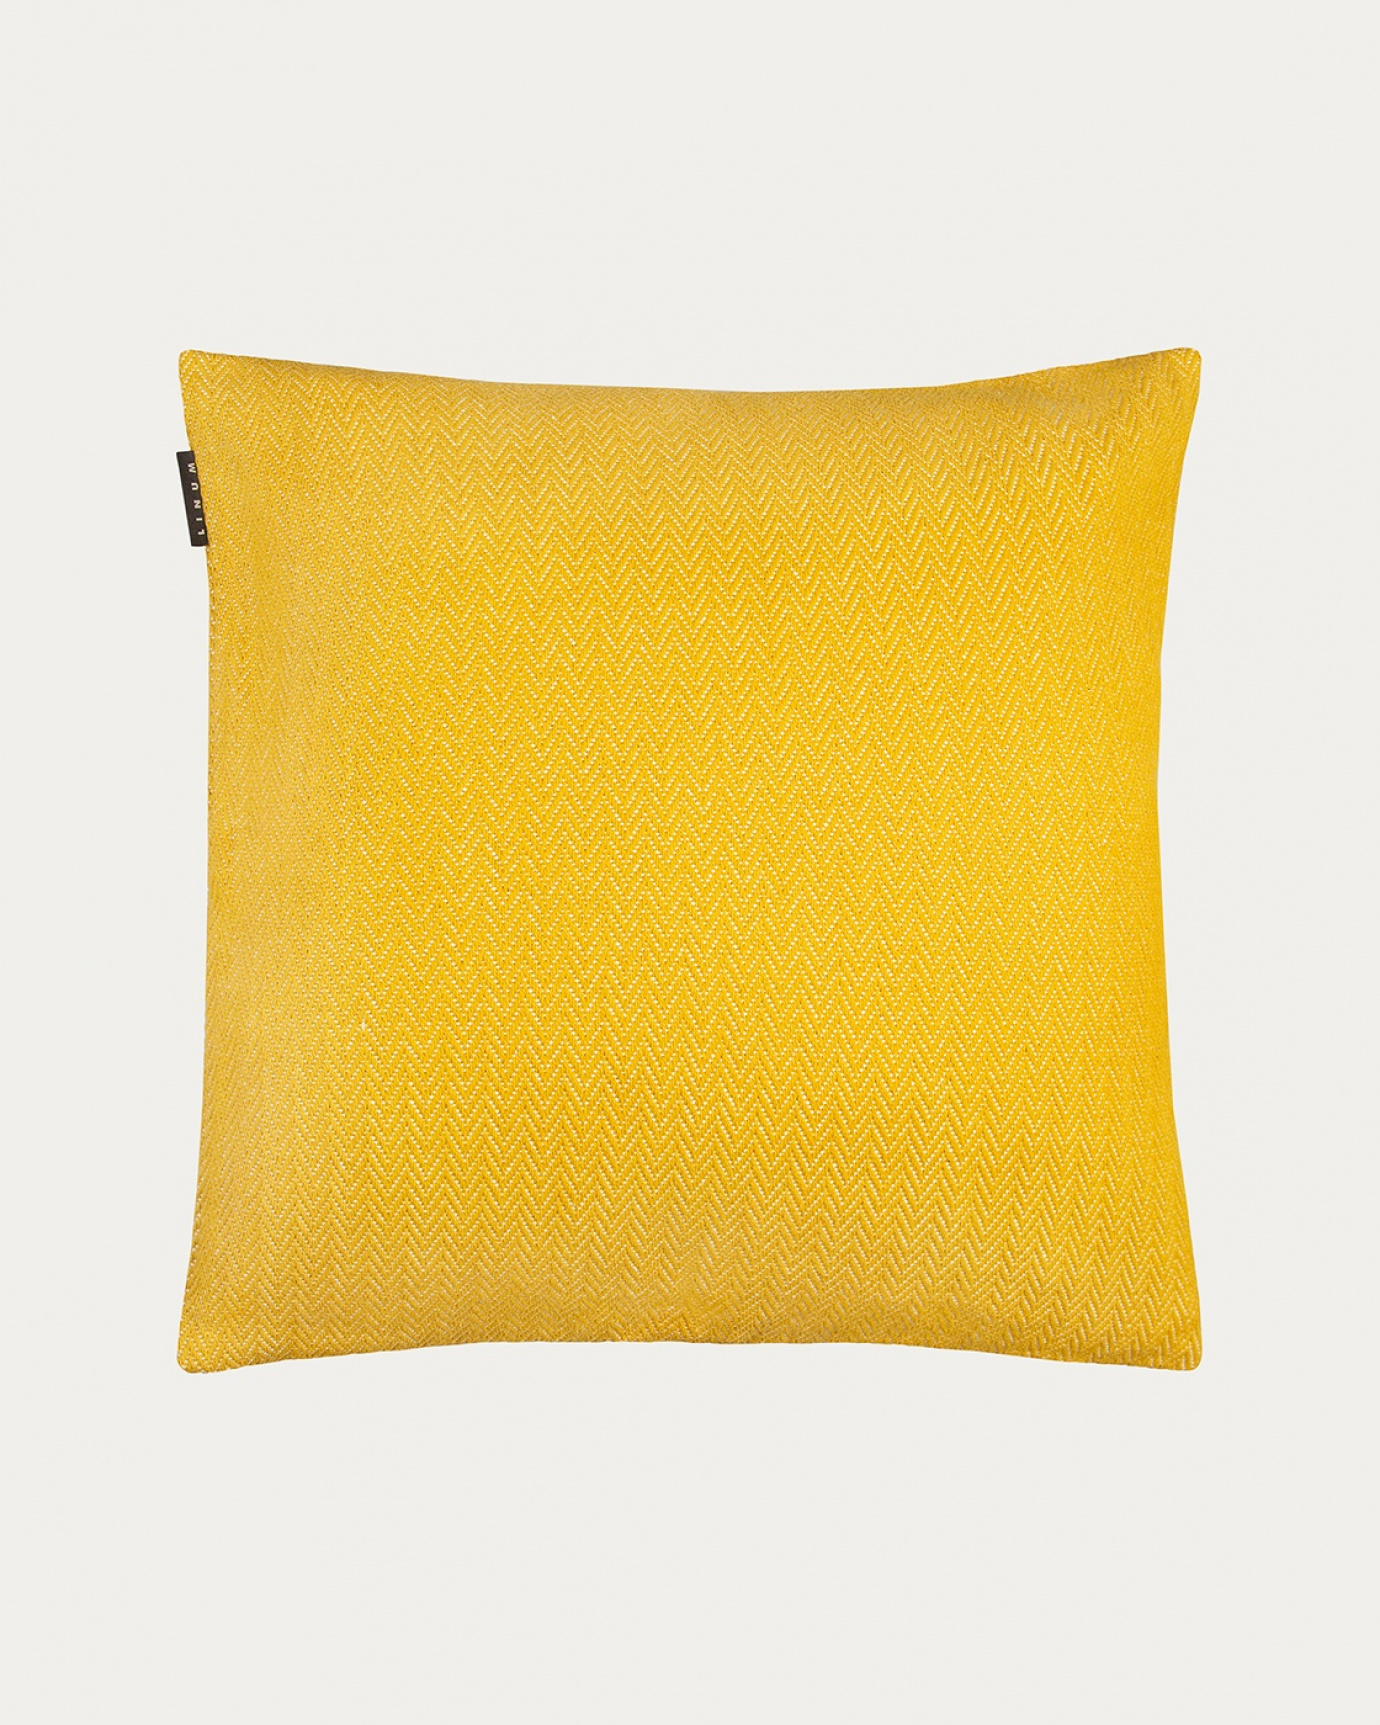 Product image mustard yellow SHEPARD cushion cover made of soft cotton with a discreet herringbone pattern from LINUM DESIGN. Size 50x50 cm.